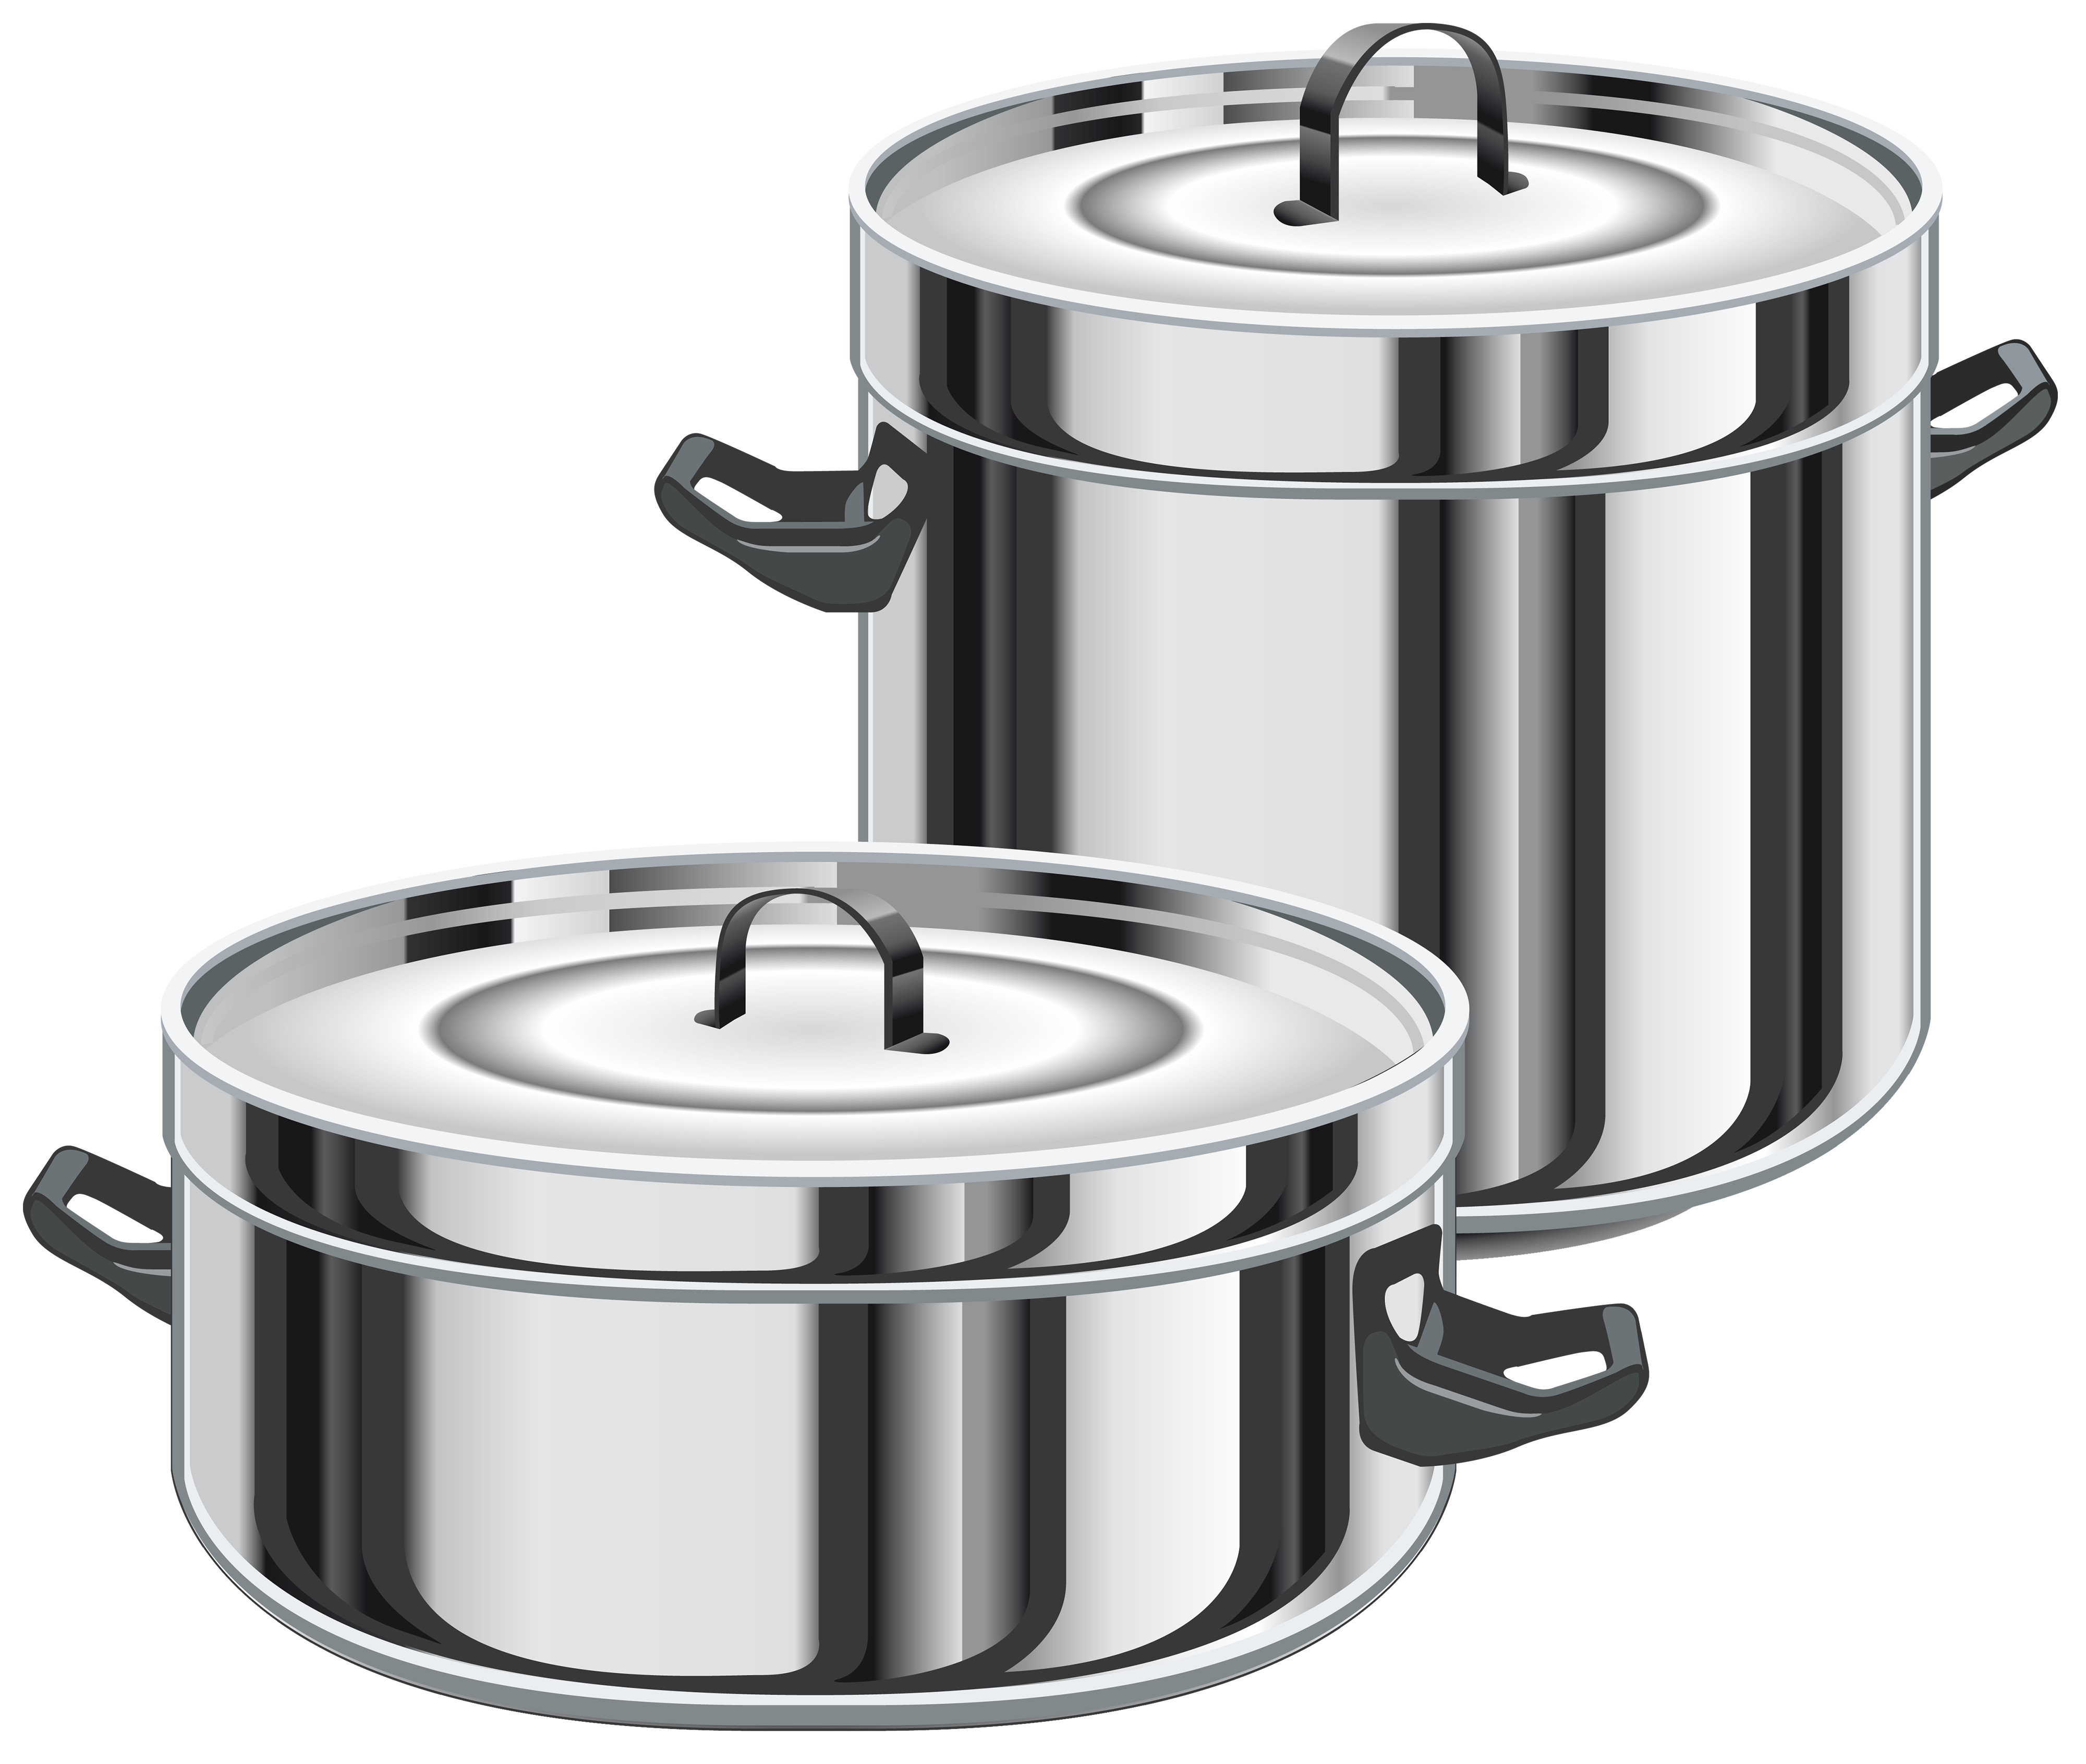 cooking clipart cooker